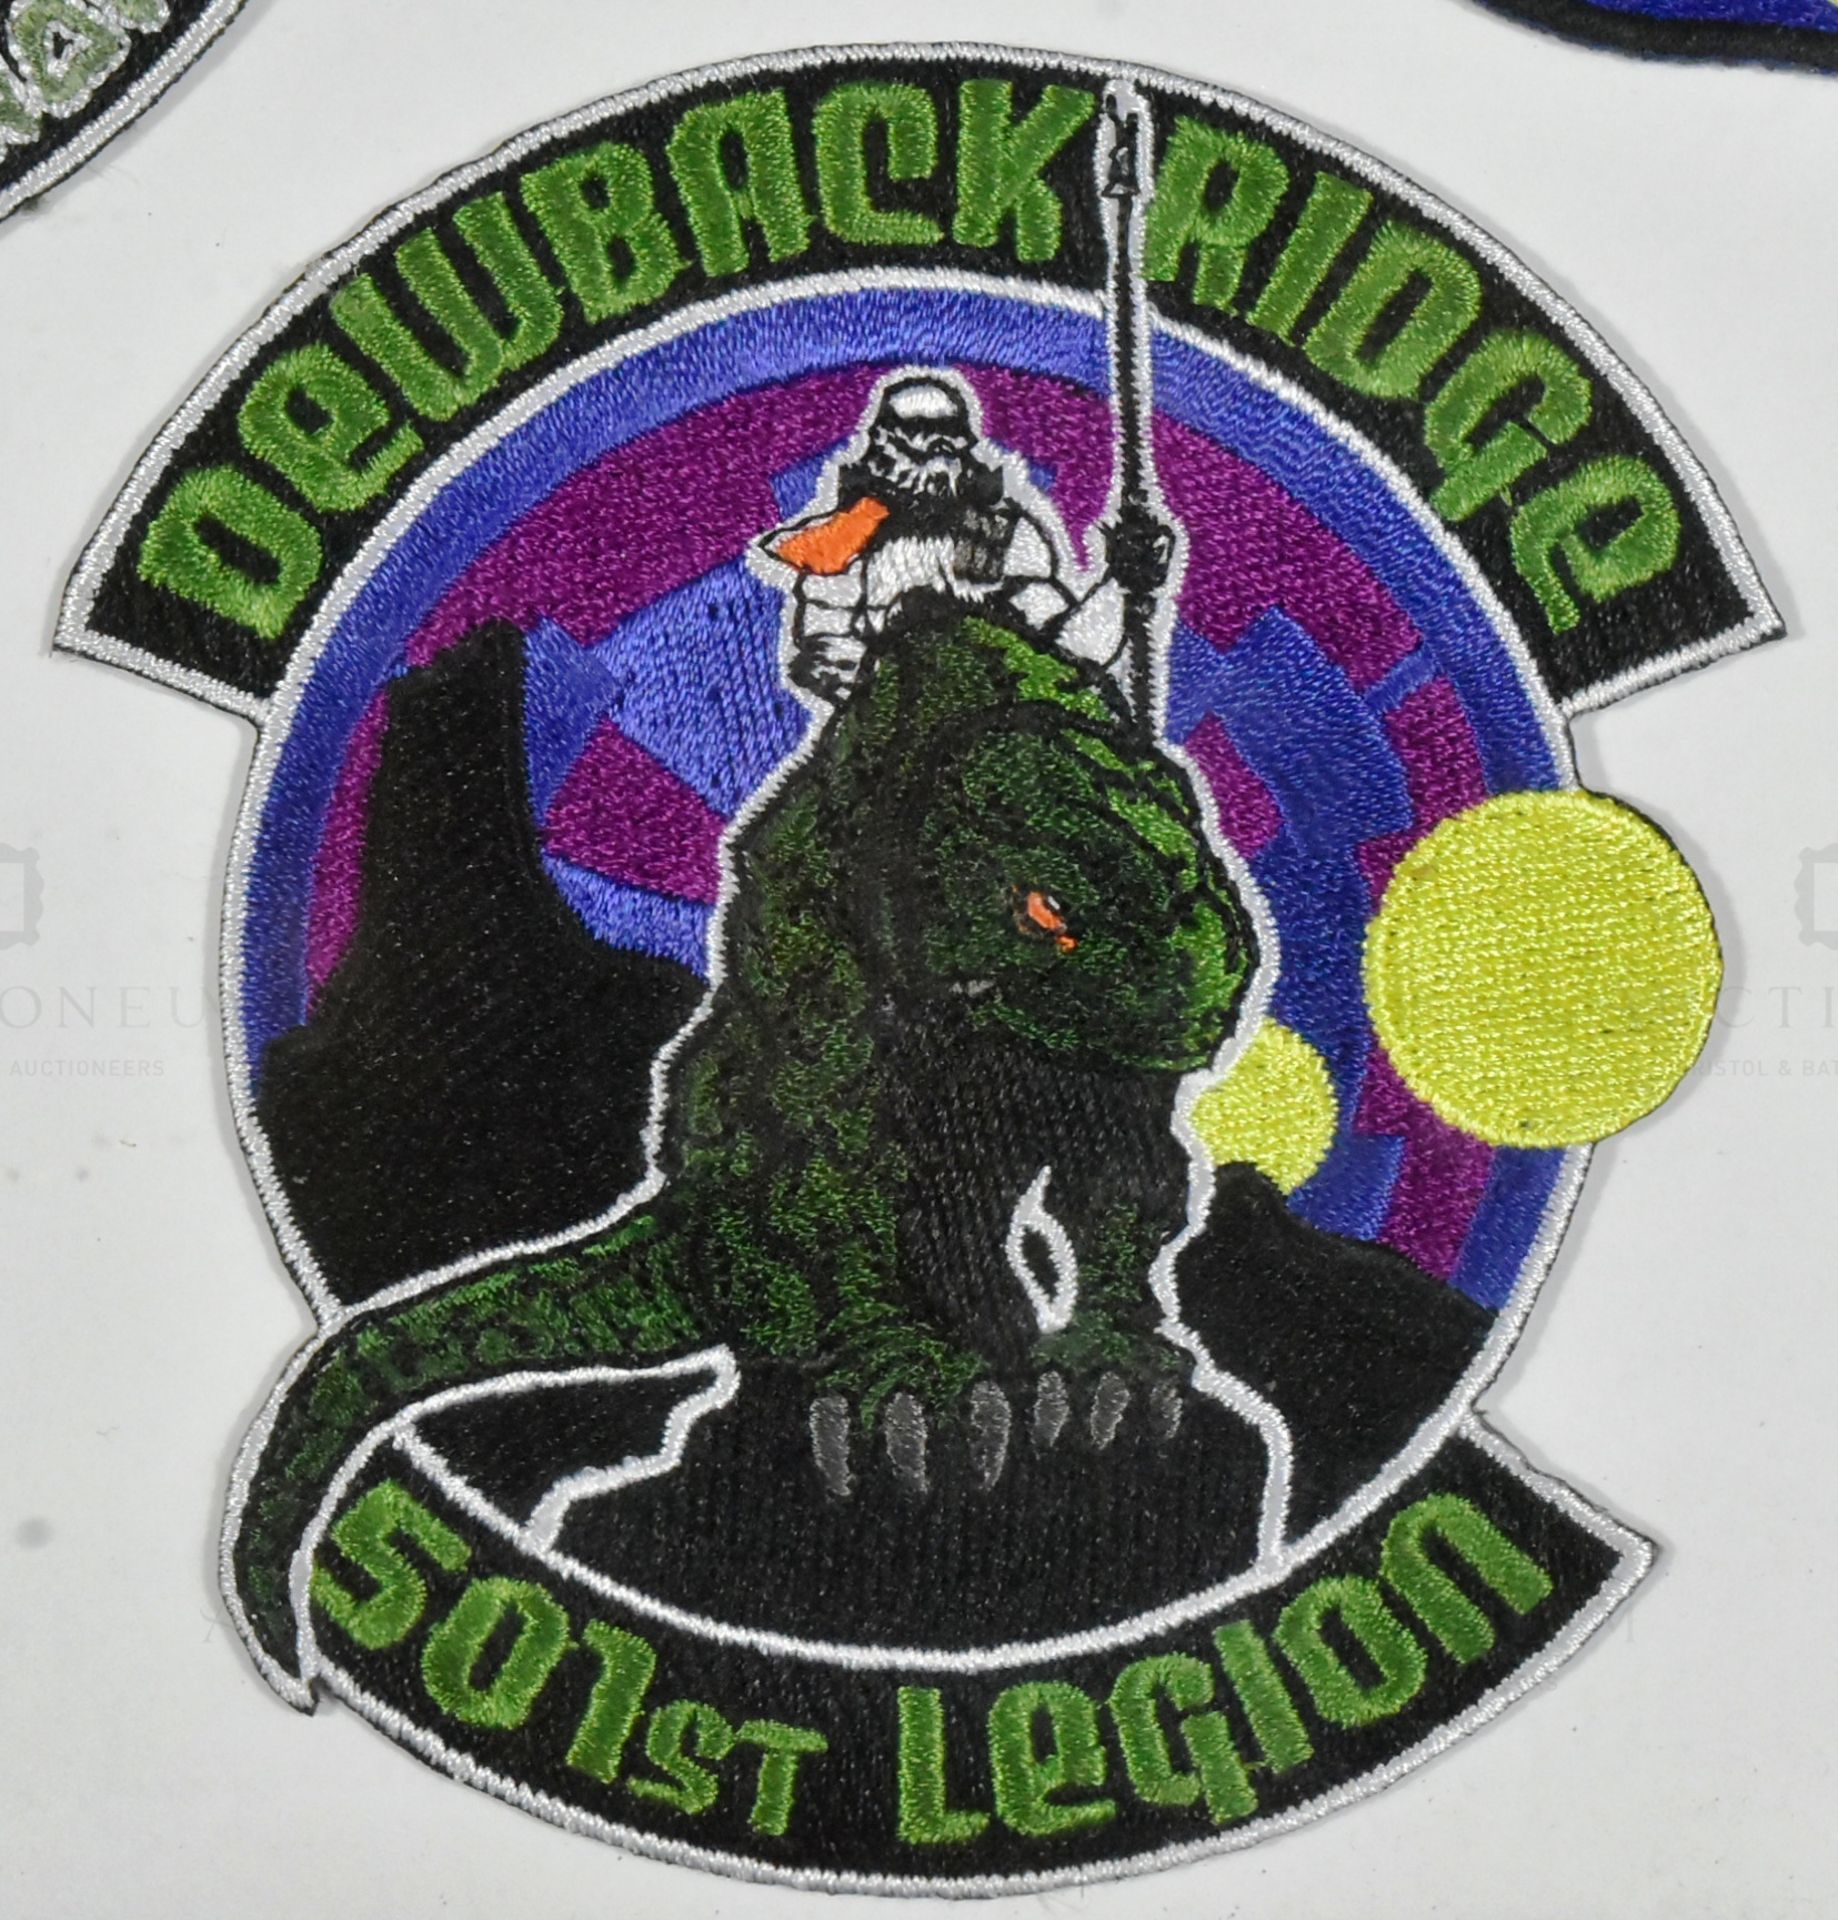 ESTATE OF JEREMY BULLOCH - STAR WARS - NEW MEXICO PATCHES - Image 2 of 4